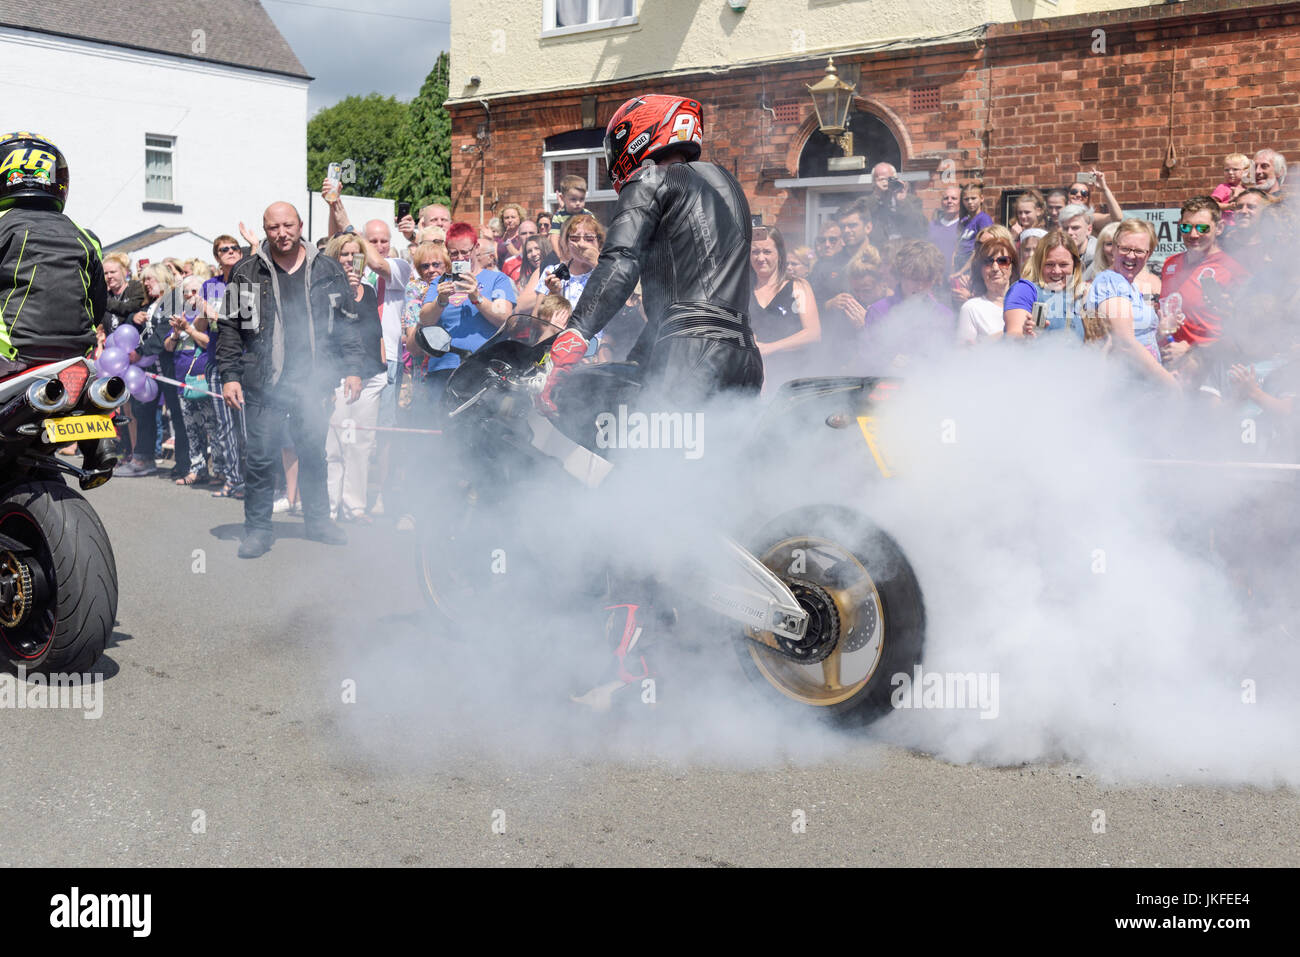 Beeston, Nottinghamshire, UK. 23rd July 2017. Nottinghamshire bikers’ group, Nottz Bikerz held a charity motorcycle run for Owen Jenkins.Owen drowned in the river Trent trying to save a young girl who was in trouble in the water.Thousands of motorcyclist turn up along with members of the public and Owens family members.Biker does burn-out in Owens honour. Credit: Ian Francis/Alamy Live News Stock Photo